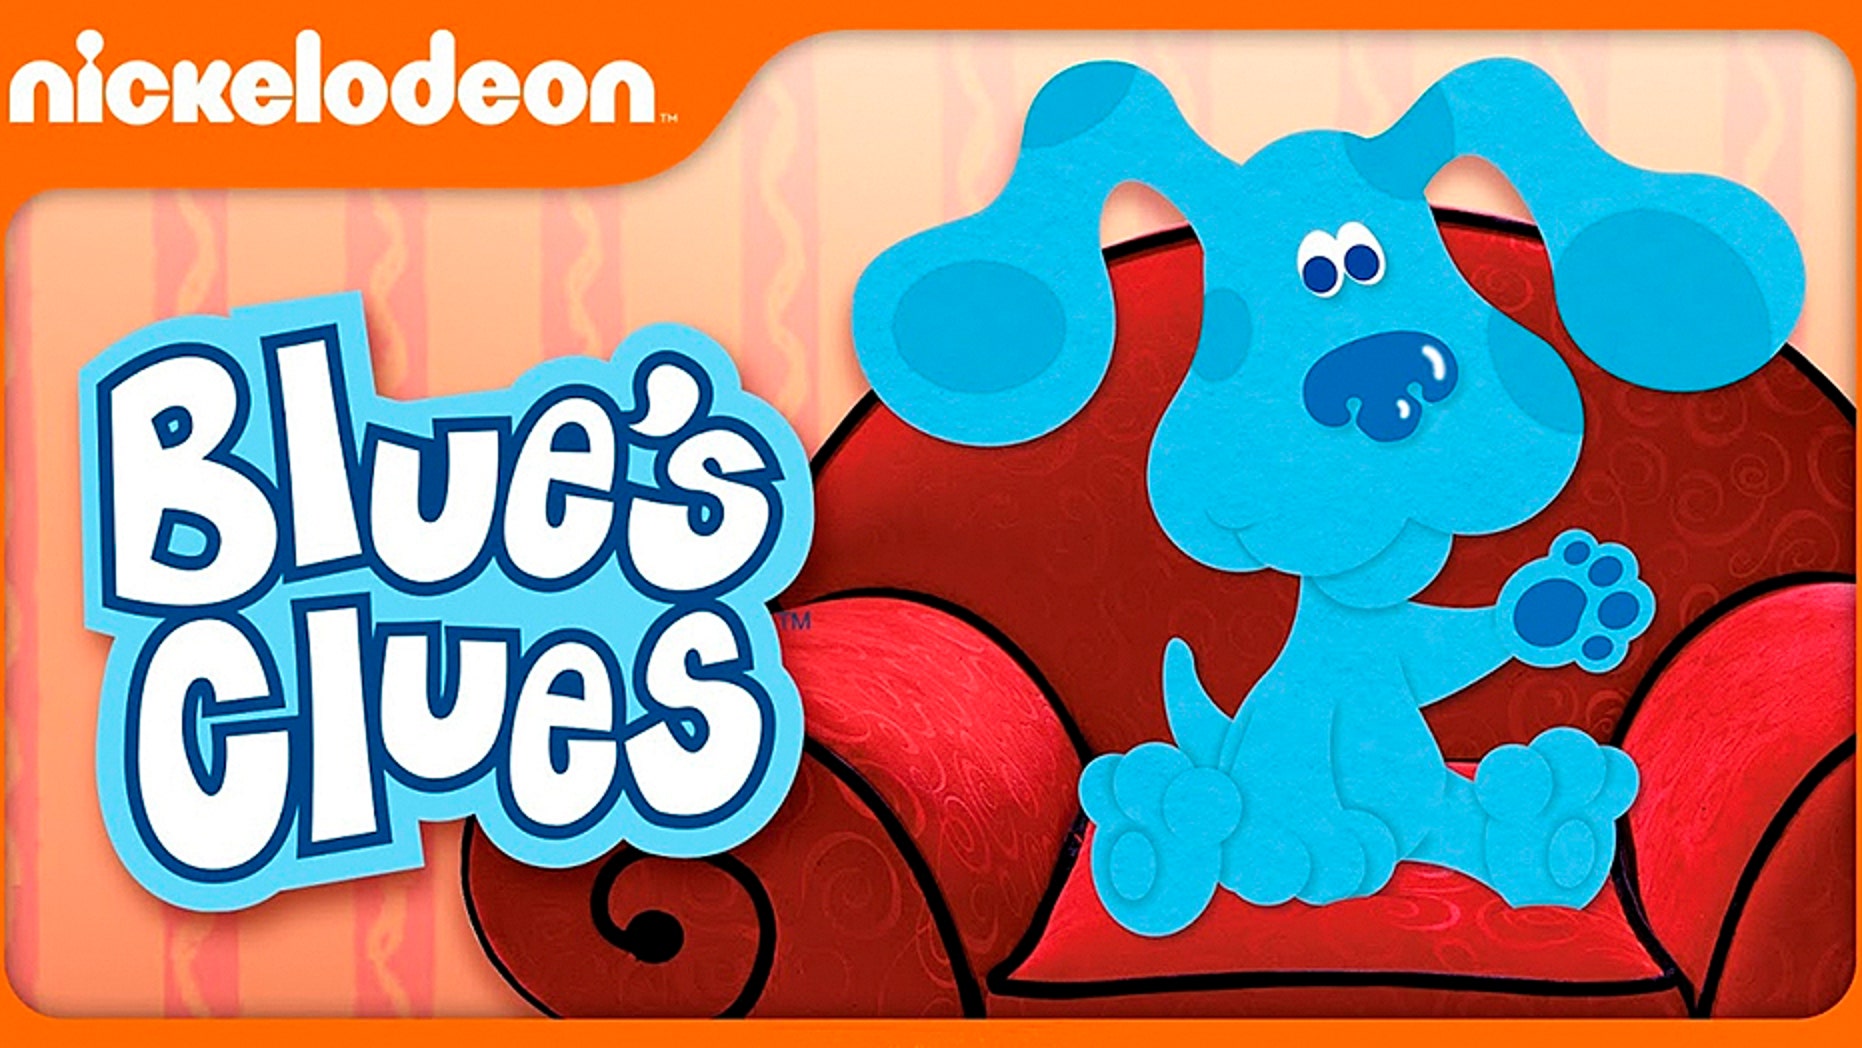 Blue's Clues Characters Nickelodeon